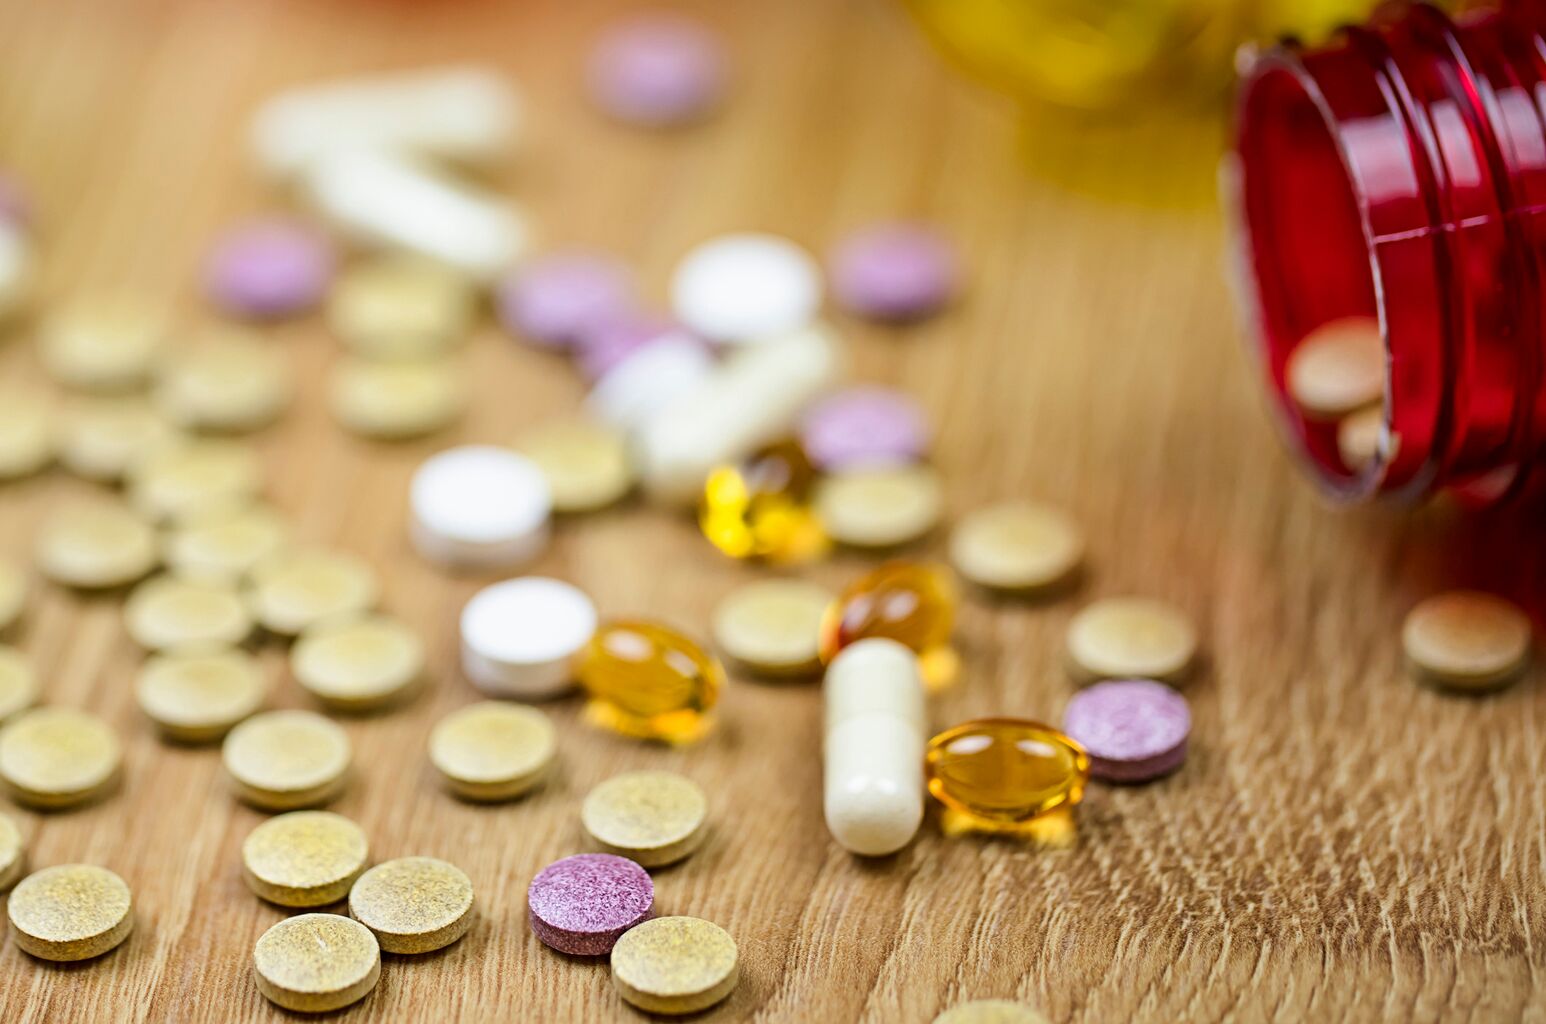 Various different types of pill capsules lay scattered on a wooden table.